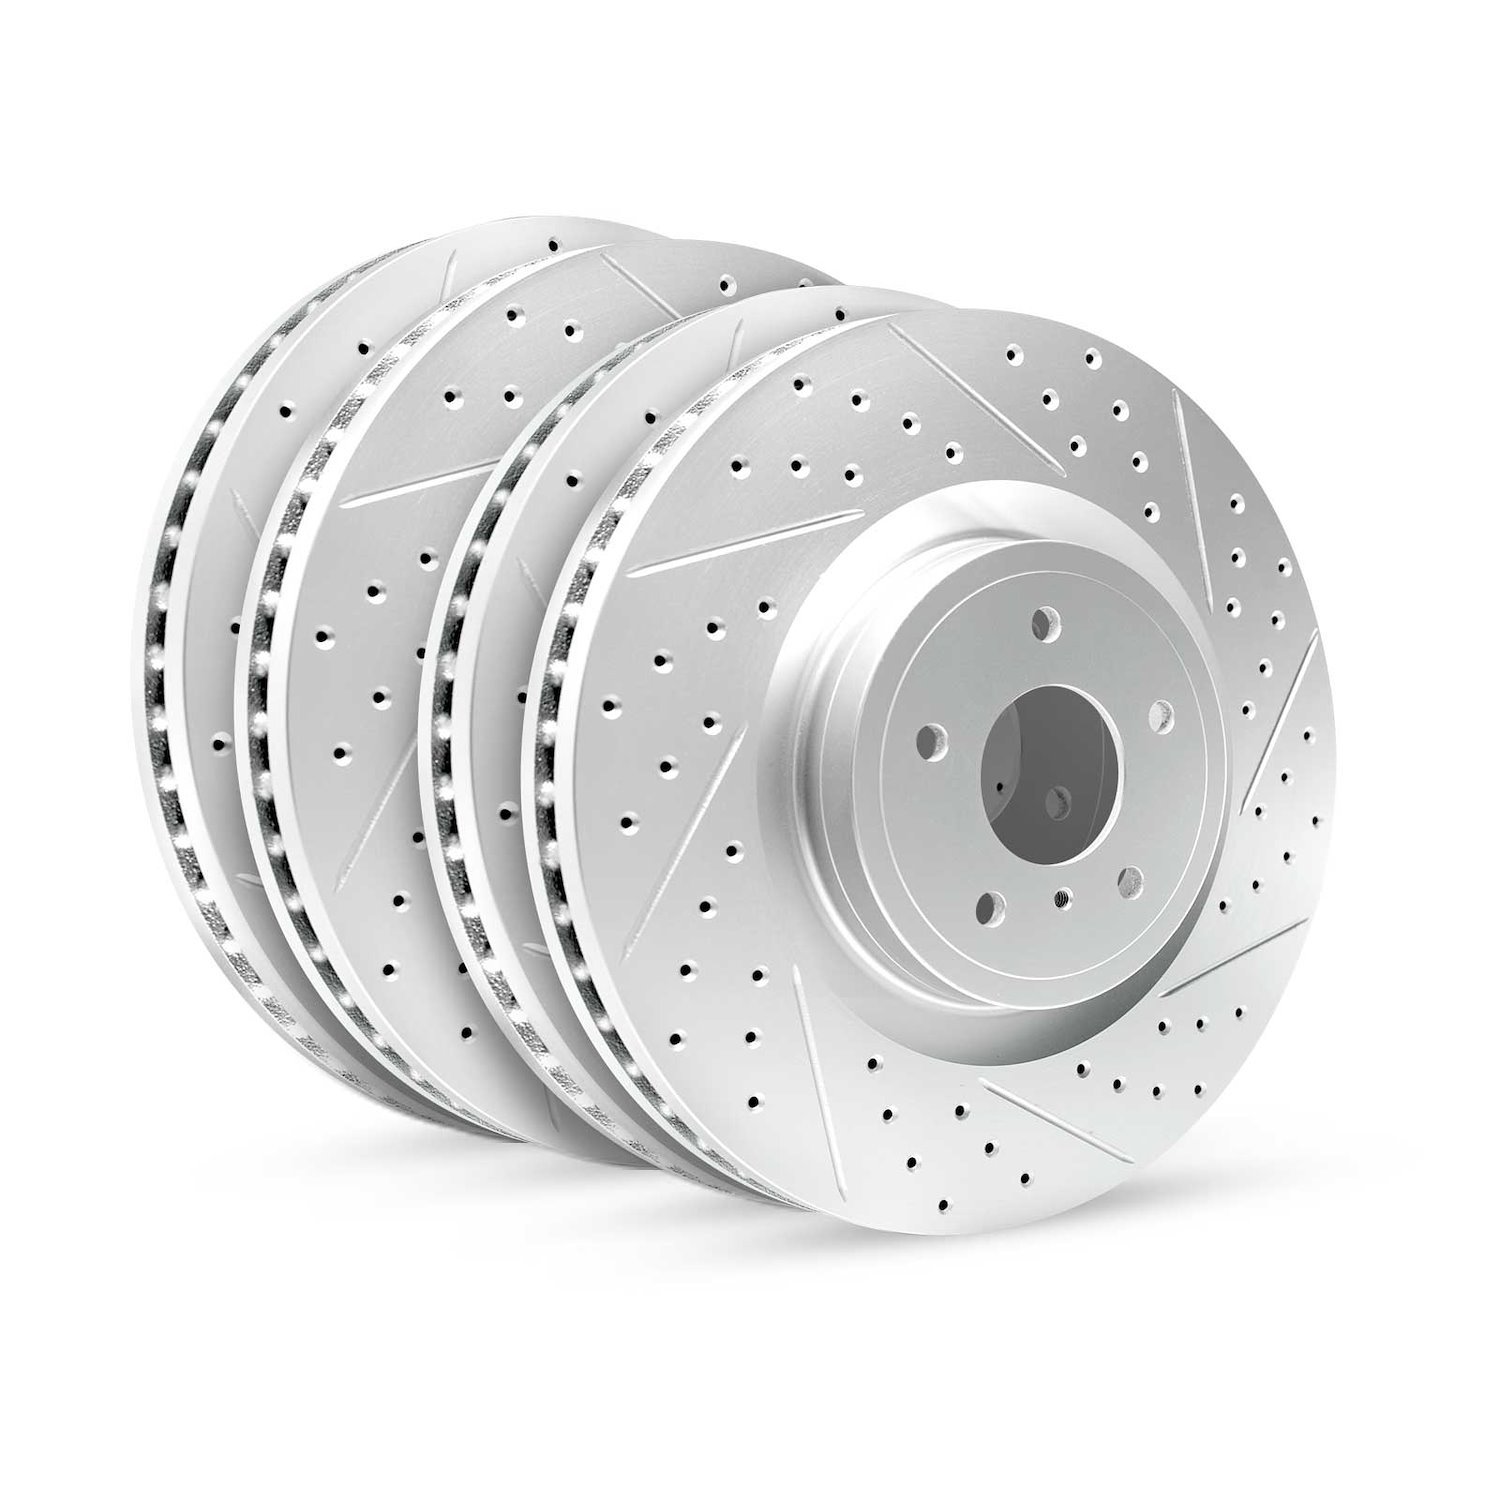 GEO-Carbon Drilled/Slotted Rotors, 2010-2011 Ford/Mazda,